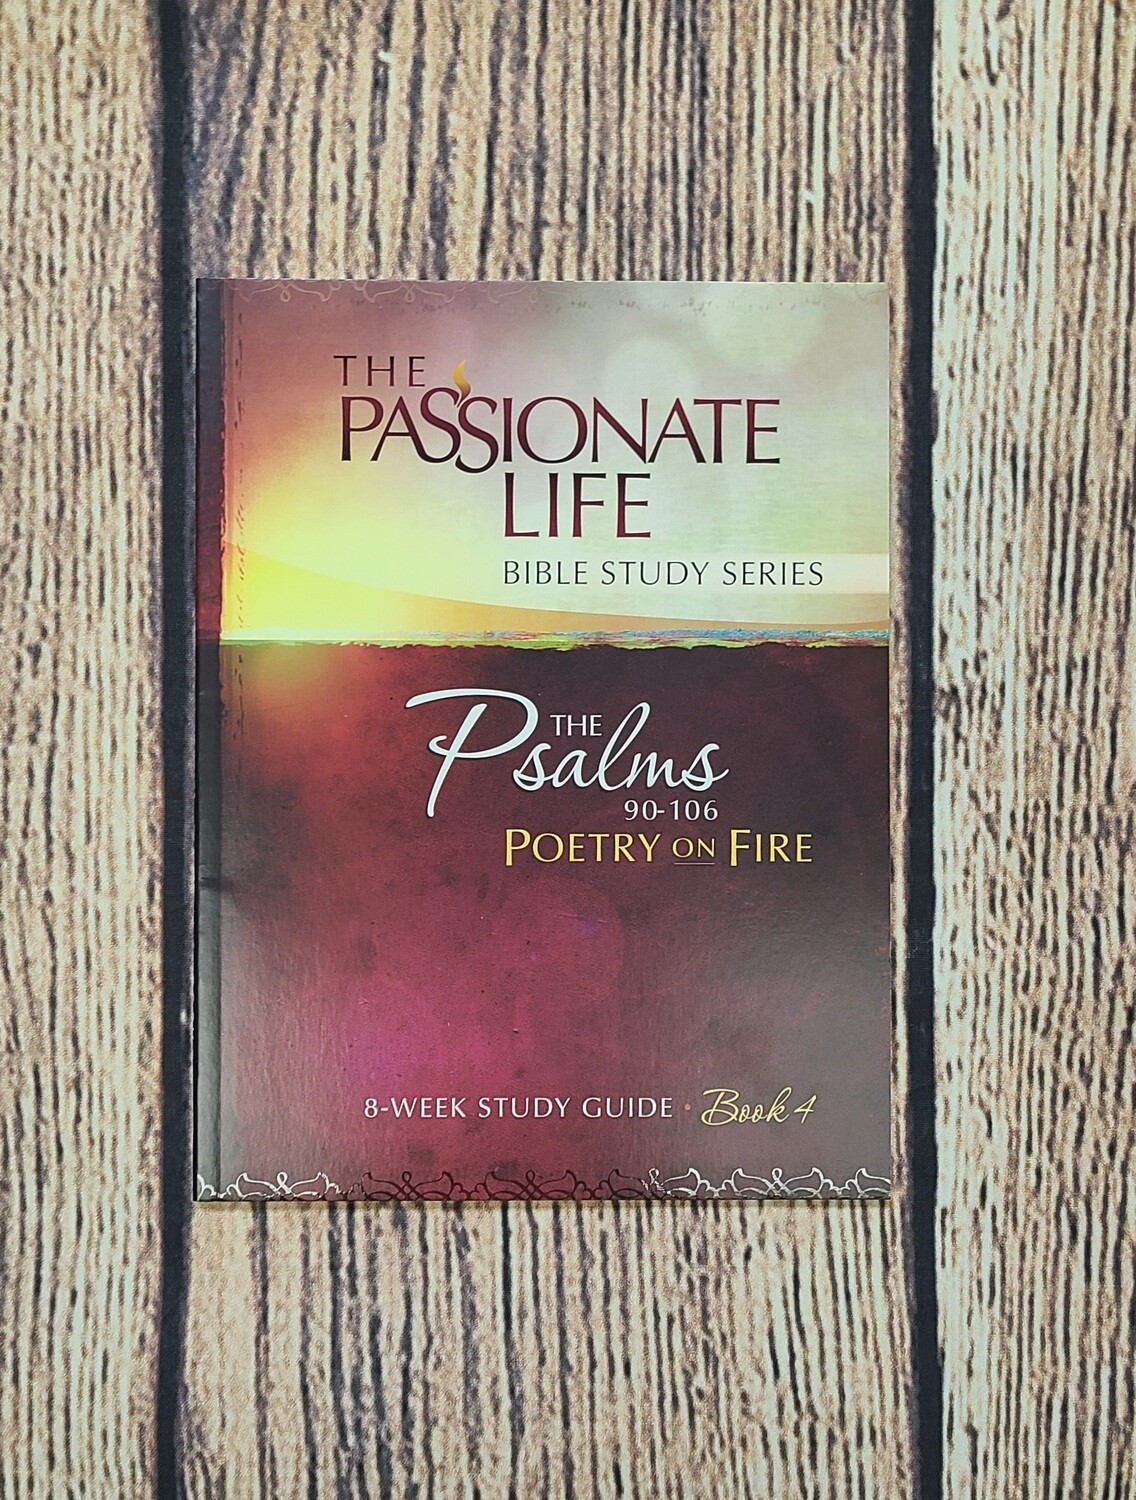 The Passionate Life Bible Study Series: The Psalms 90-106 Poetry on Fire - 8-Week Study Guide - Book 4 by Jeremy Bouma